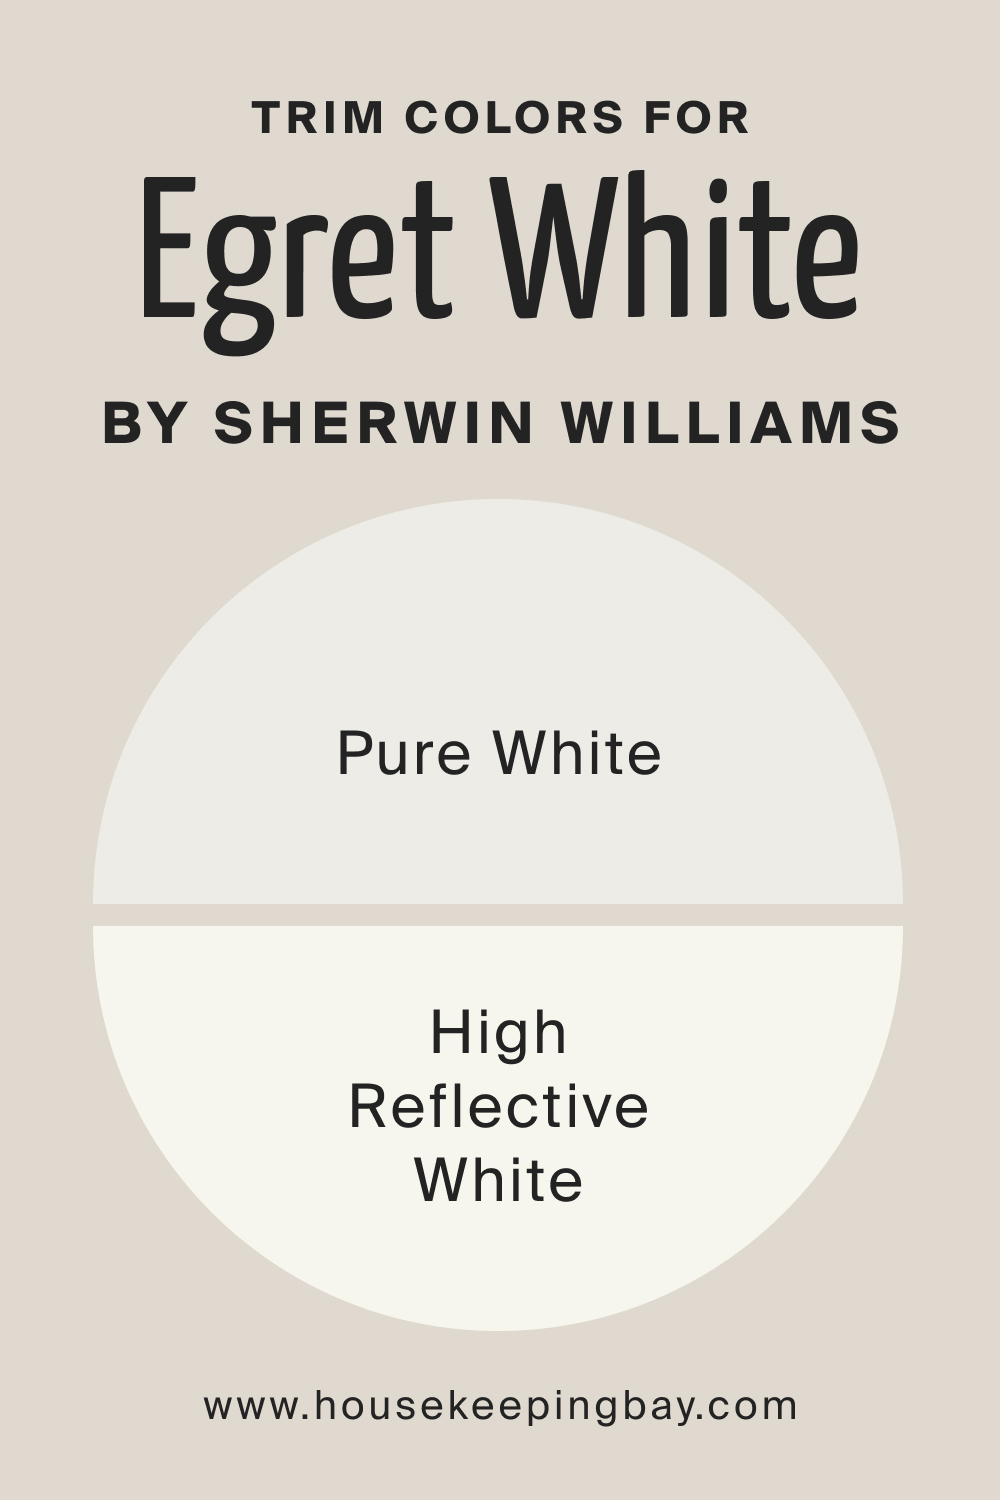 Trim Colors for Egret White SW 7570 by Sherwin Williams